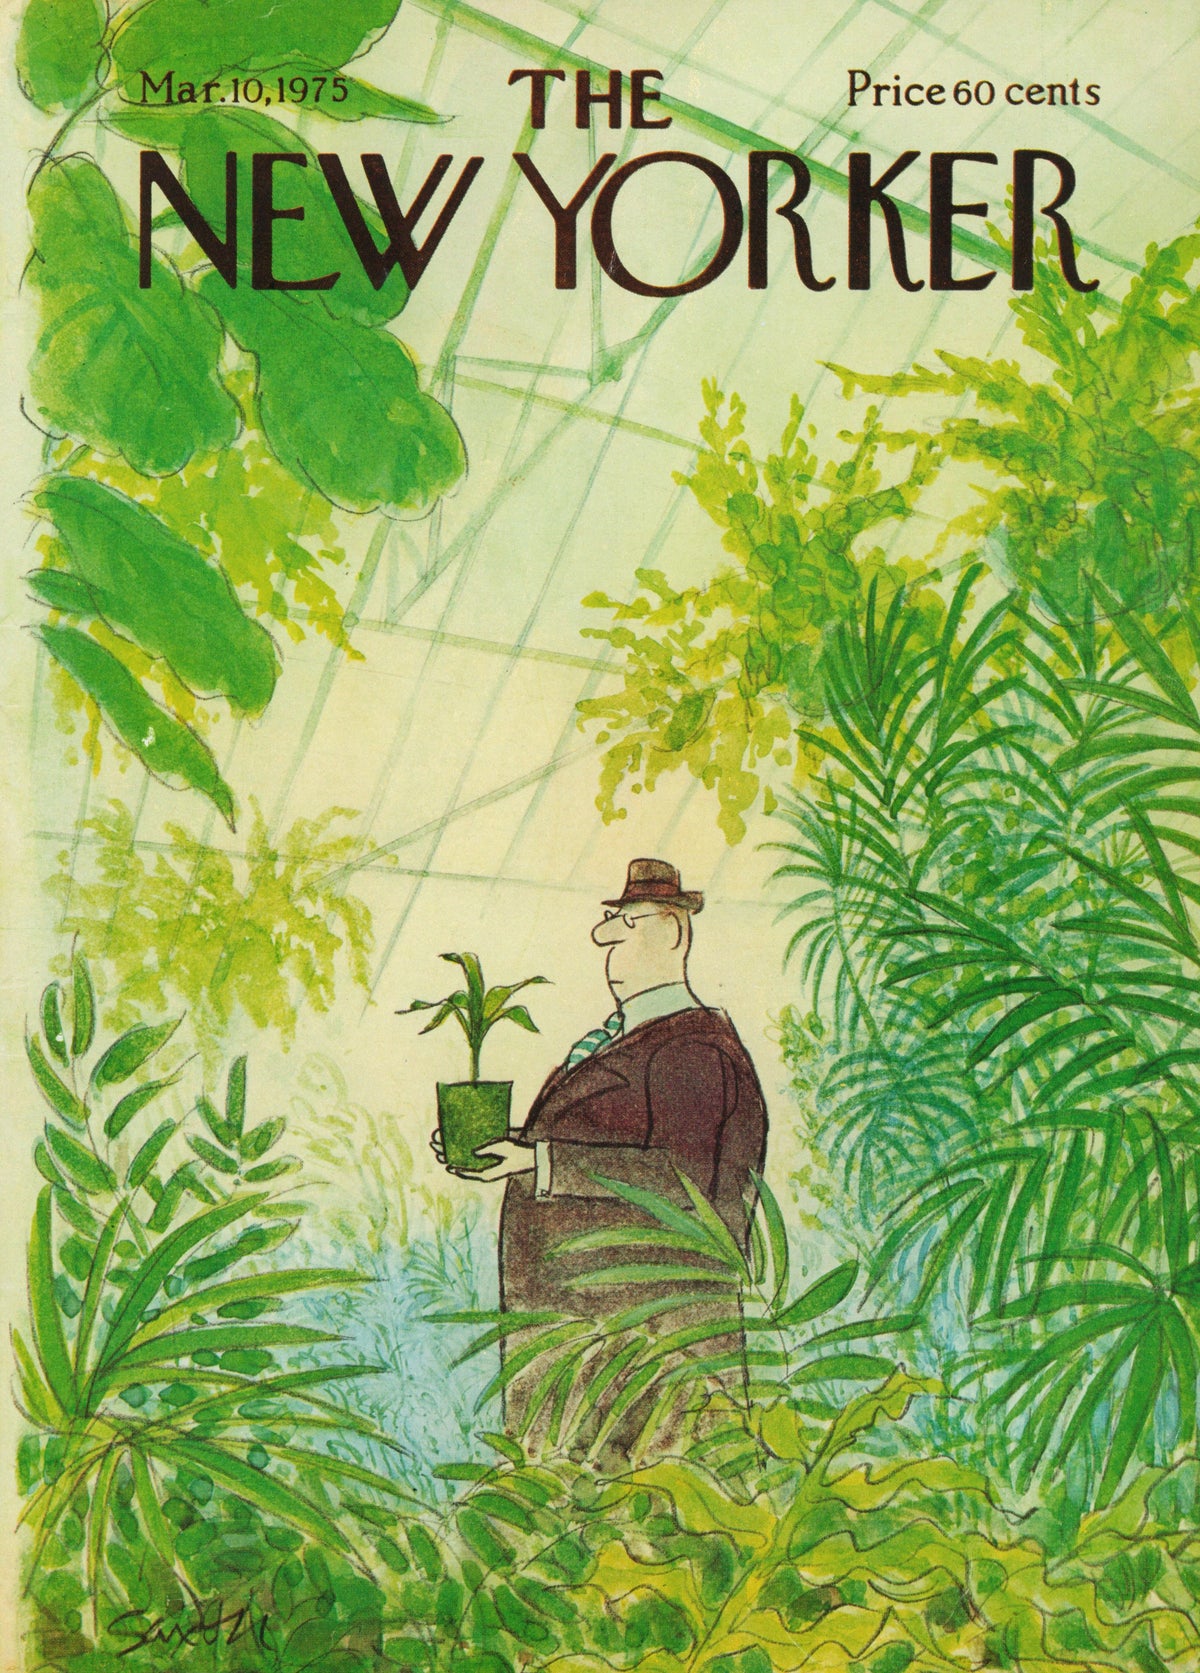 Greenhouse- The New Yorker - Authentic Vintage Antique Print